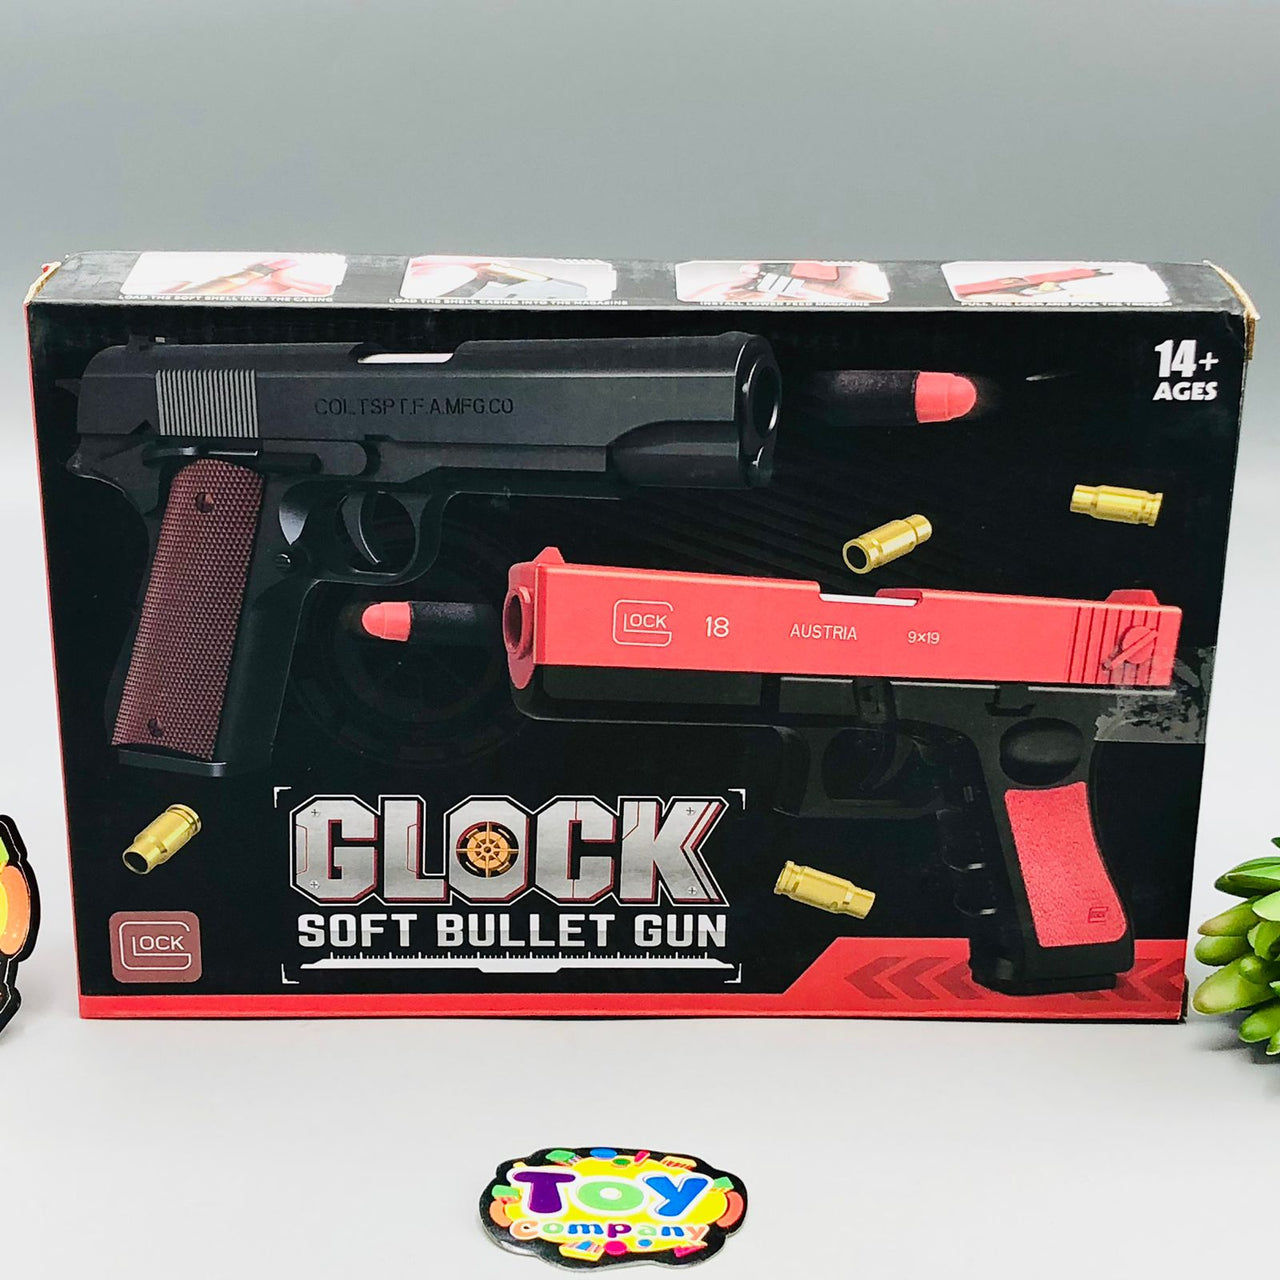 Manual Load-it Gun Glock With Shell Ejection